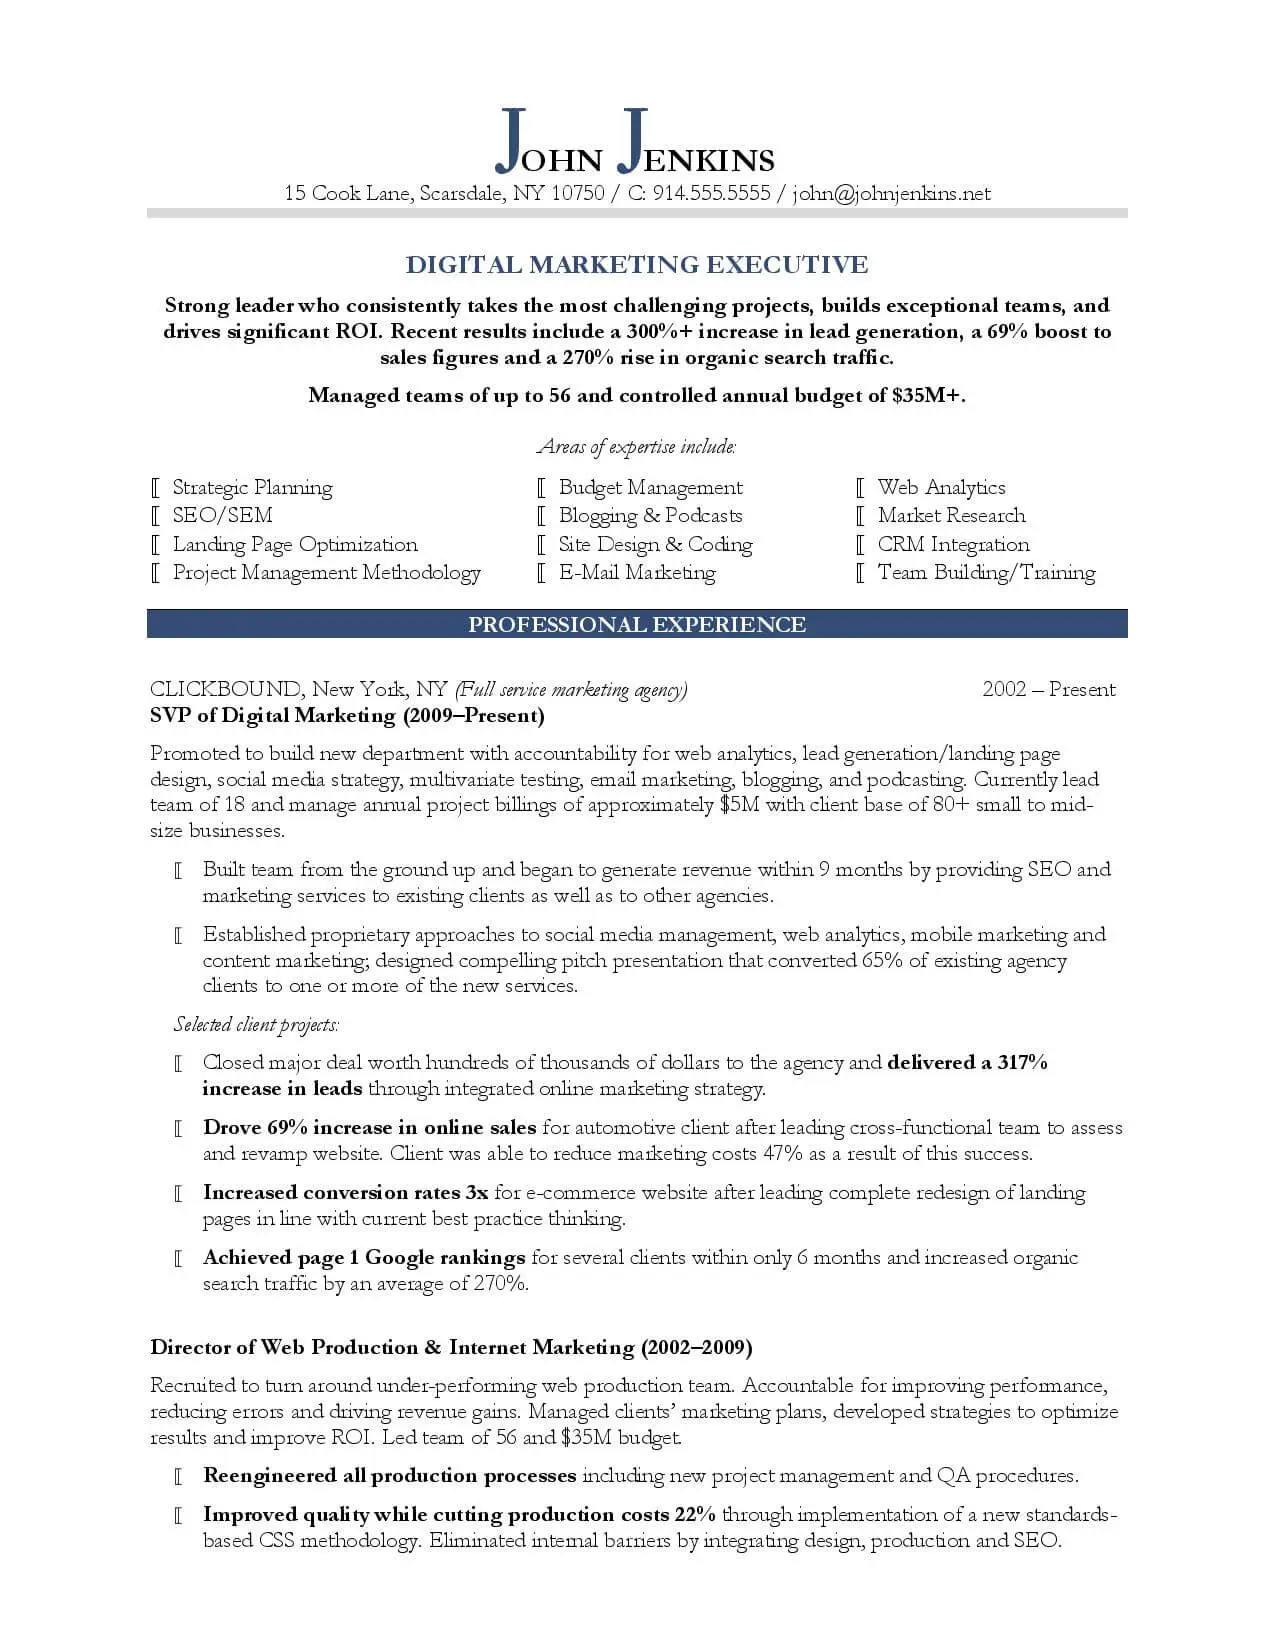 10 marketing resume samples hiring managers will notice